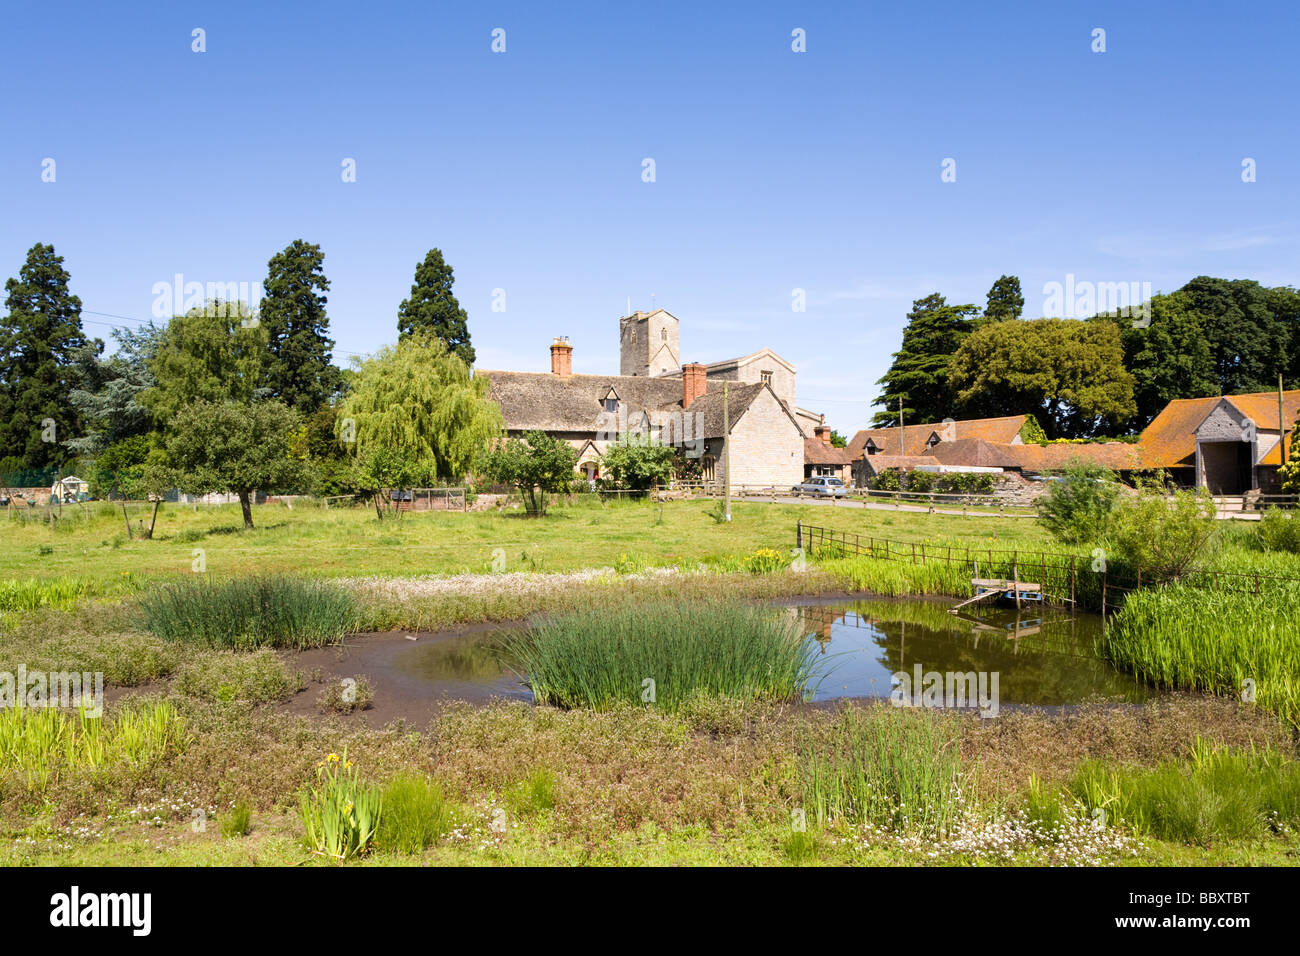 Priory Farm and the Priory Church of St Mary at Deerhurst, Gloucestershire UK Stock Photo